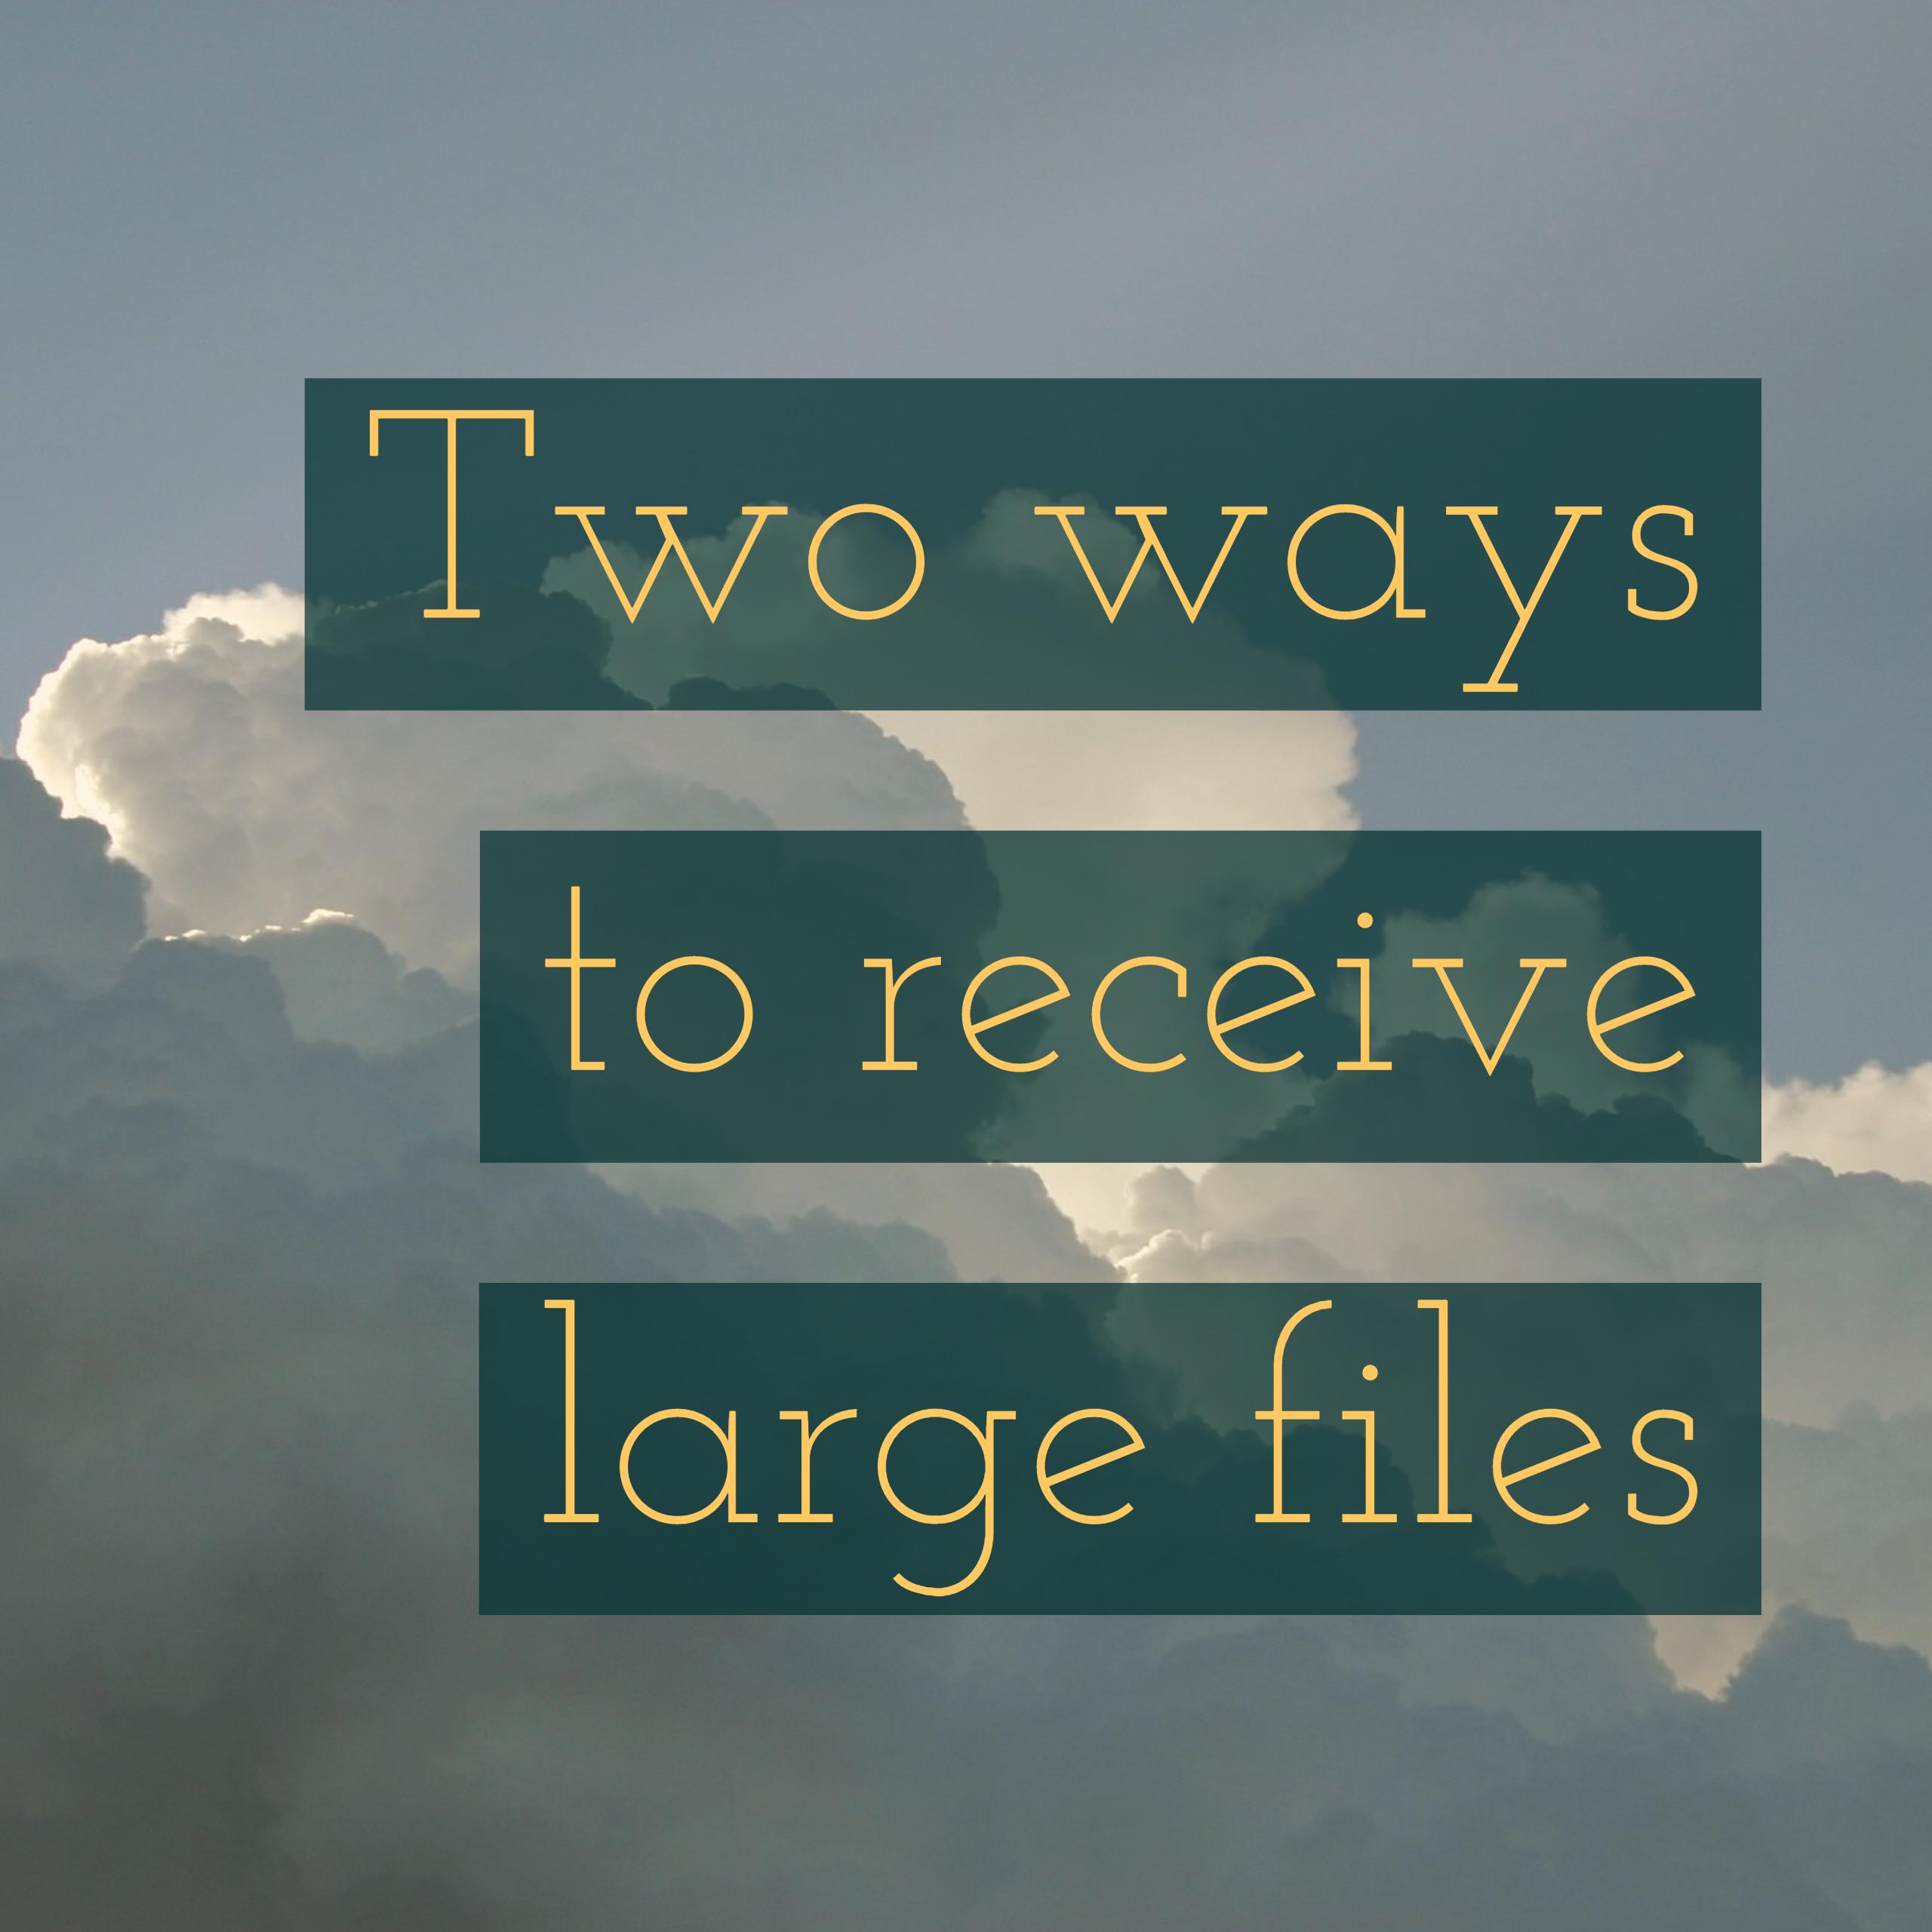 Two ways to receive large files